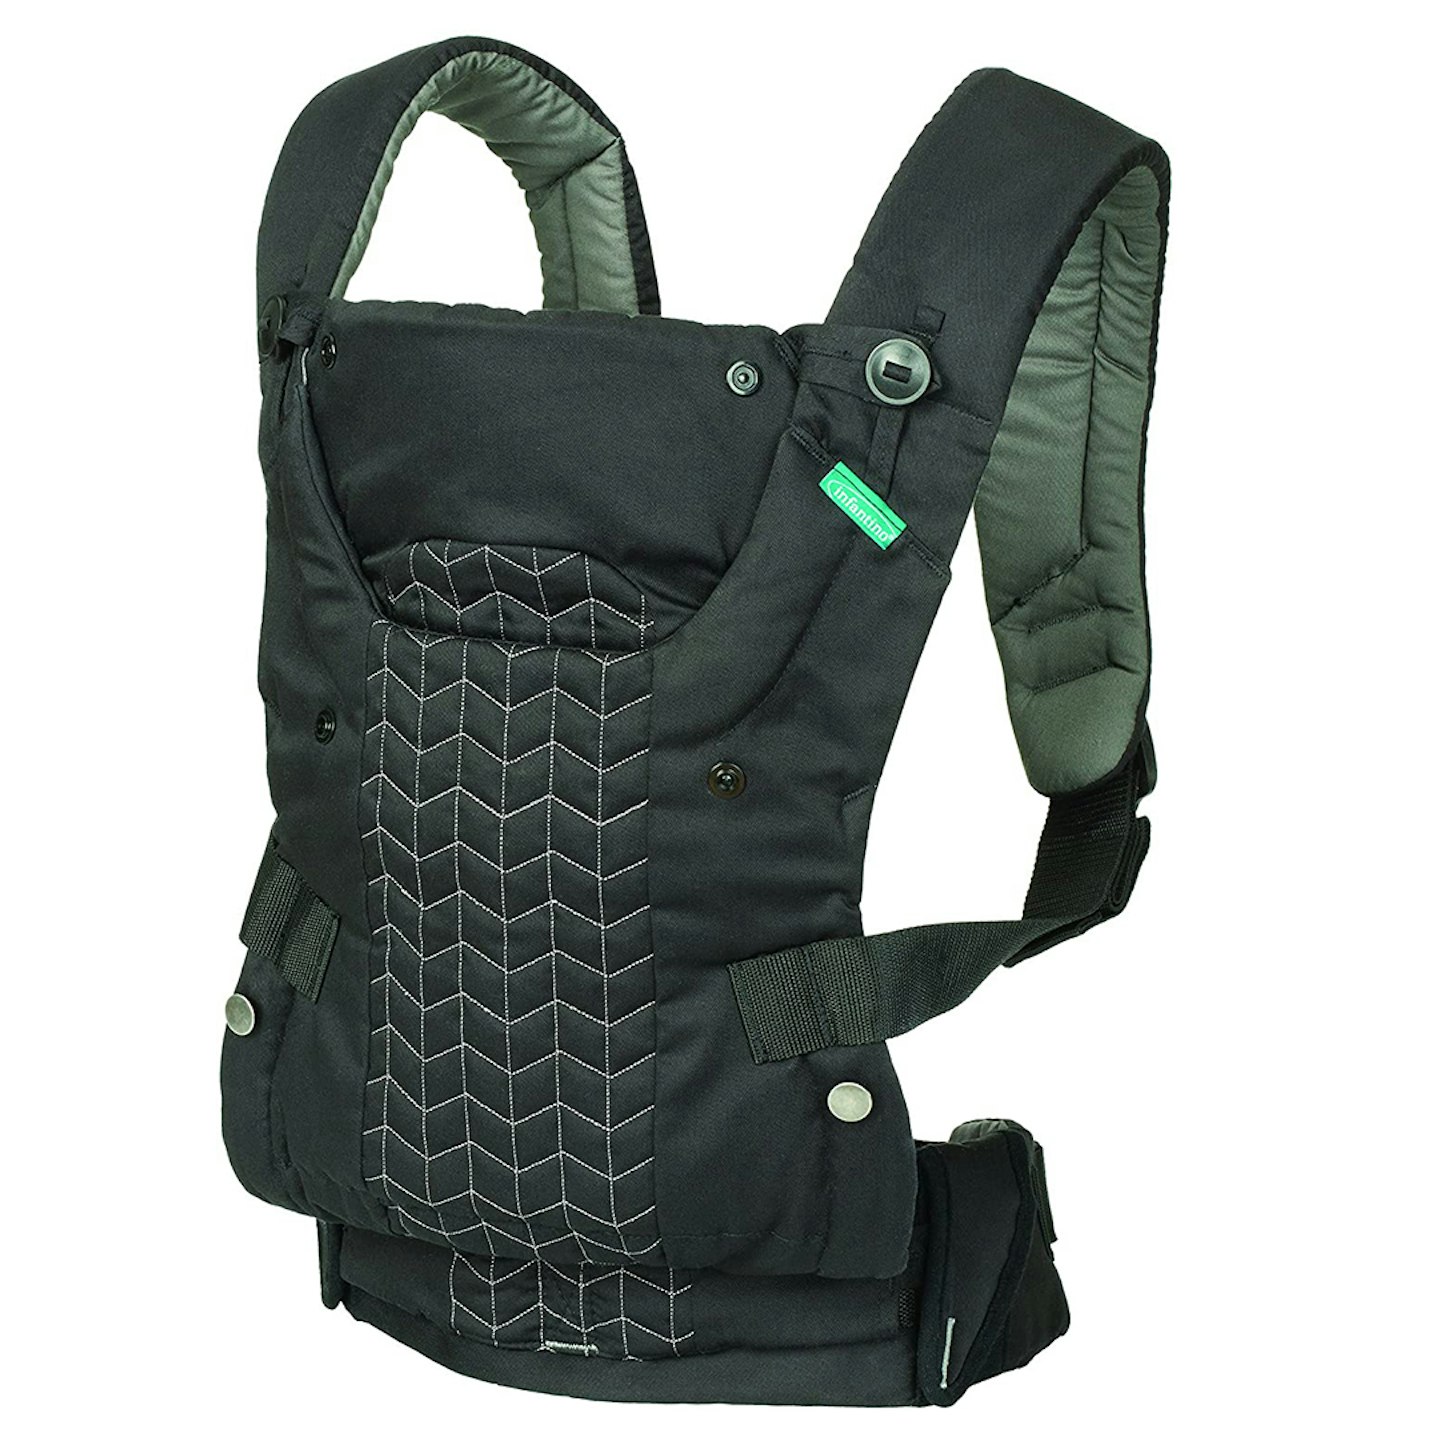 Infantino Upscale Carrier